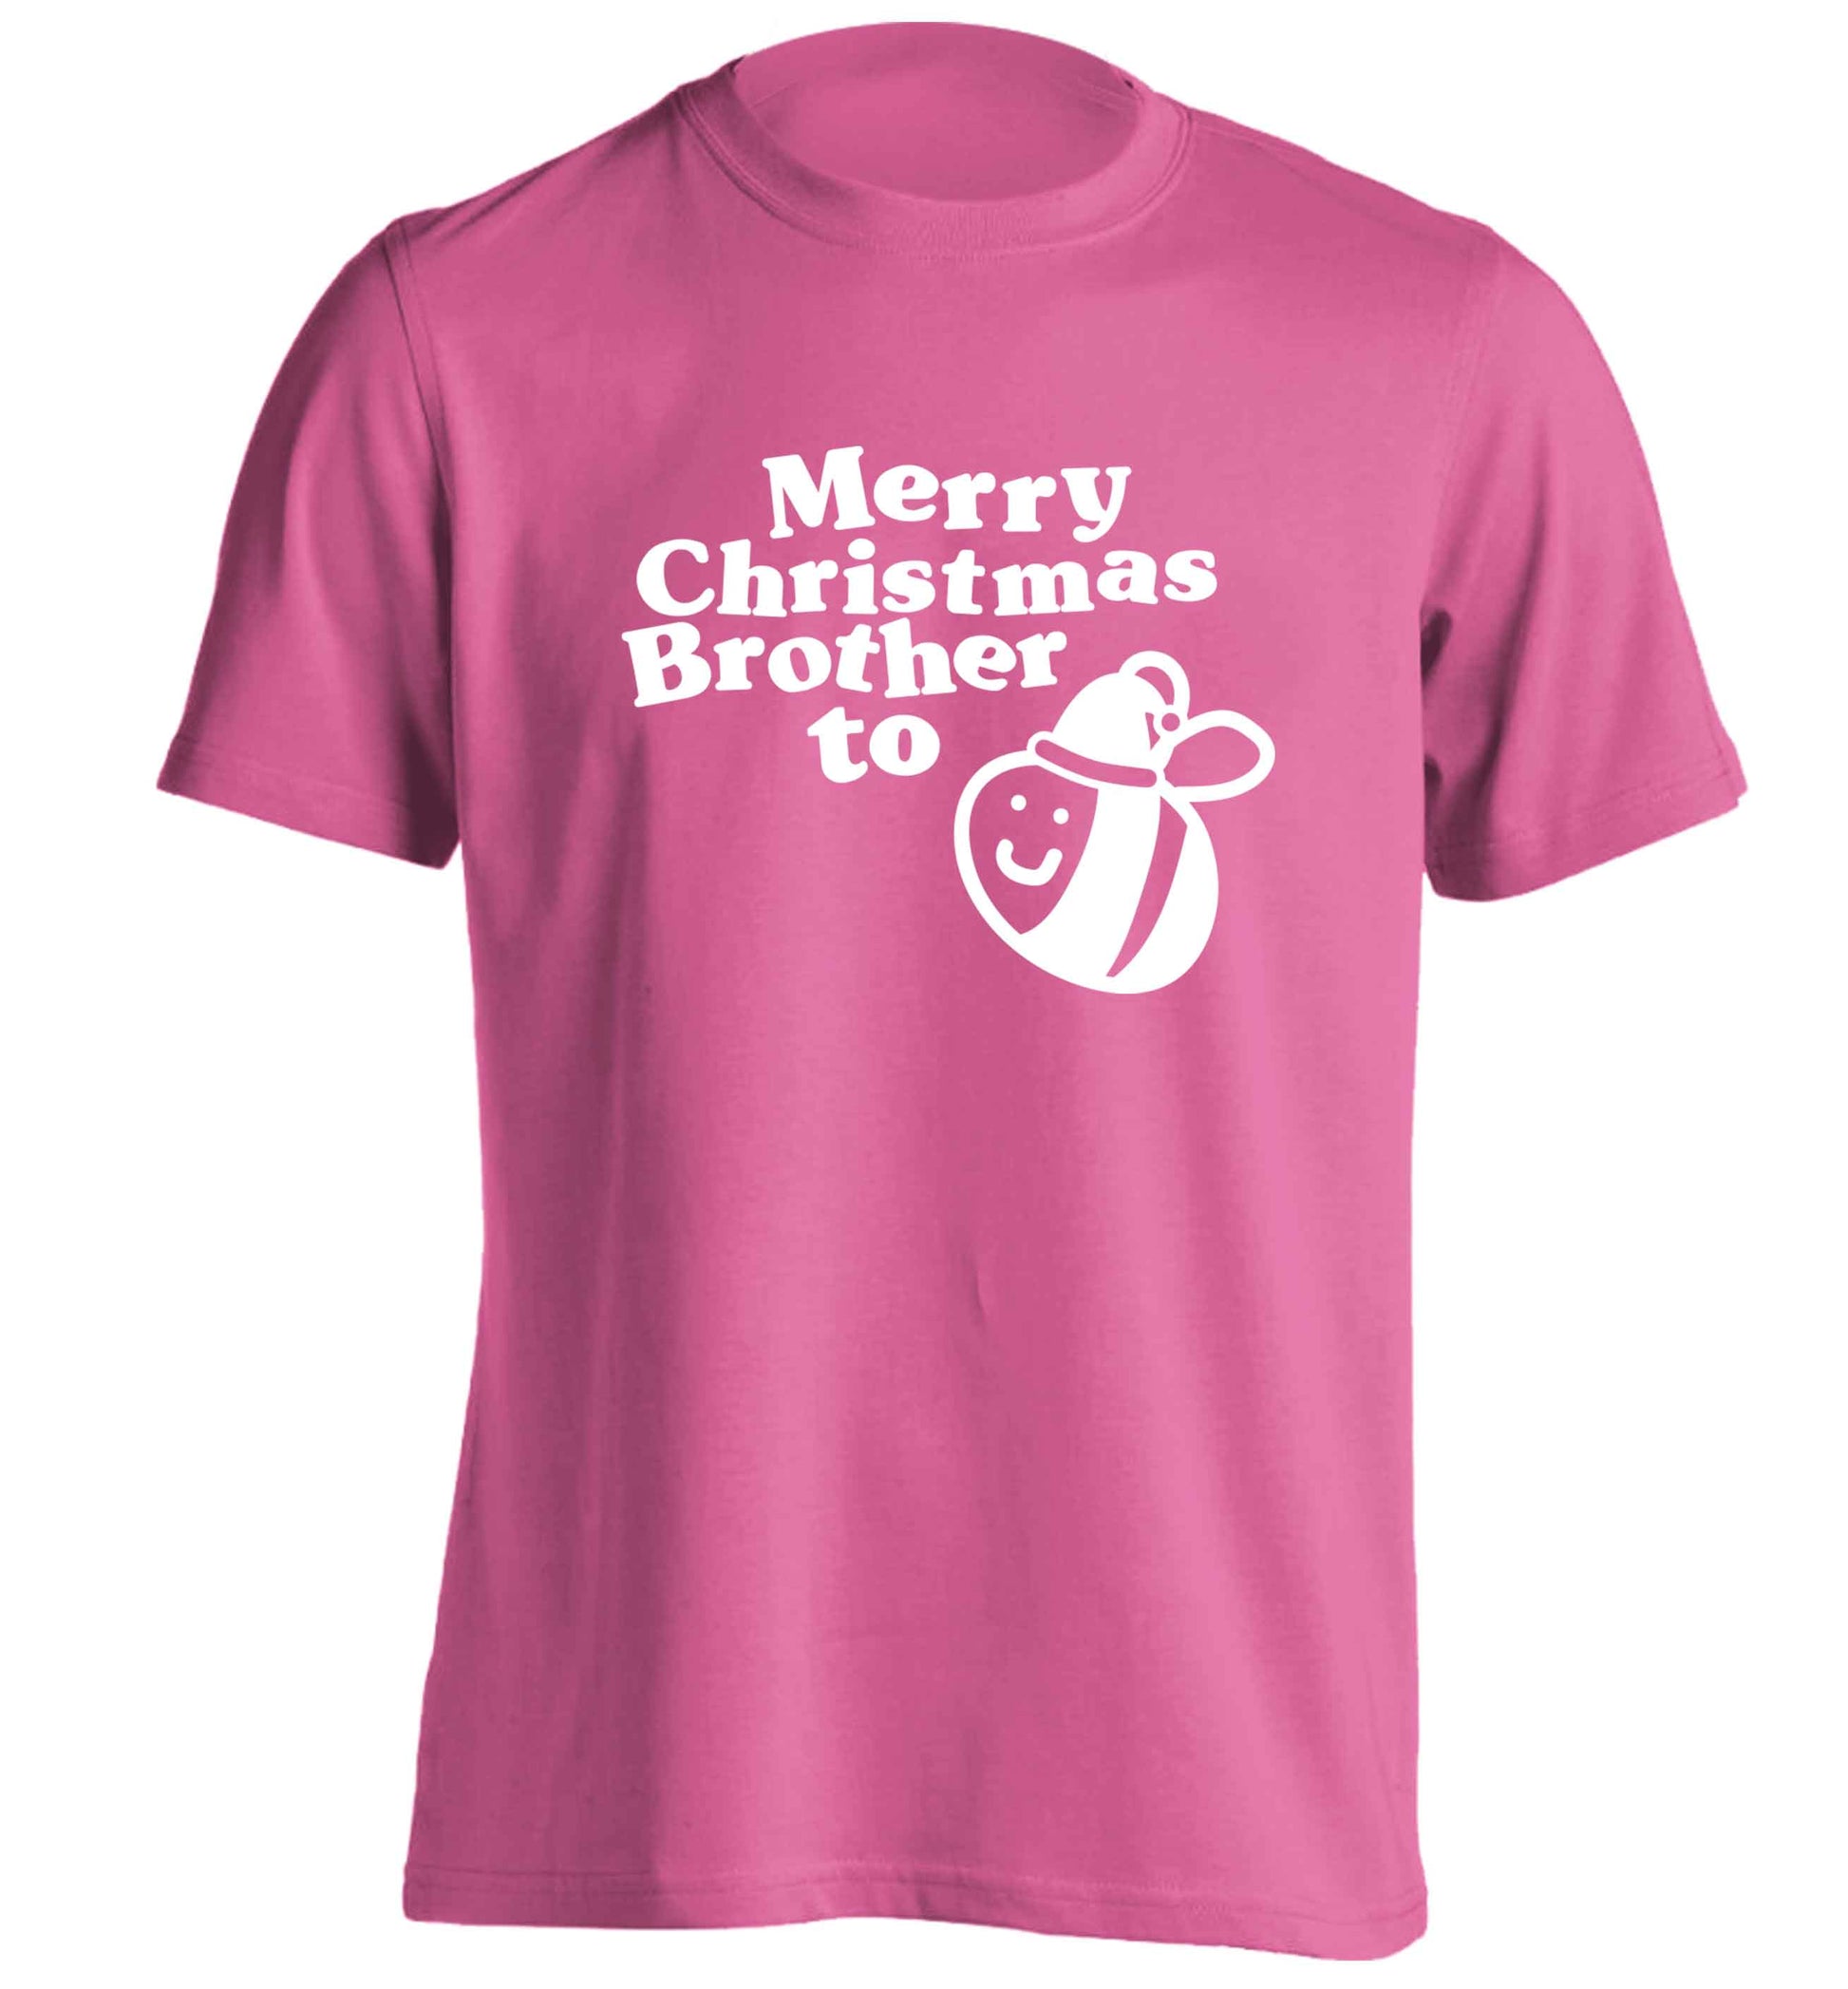 Merry Christmas brother to be adults unisex pink Tshirt 2XL